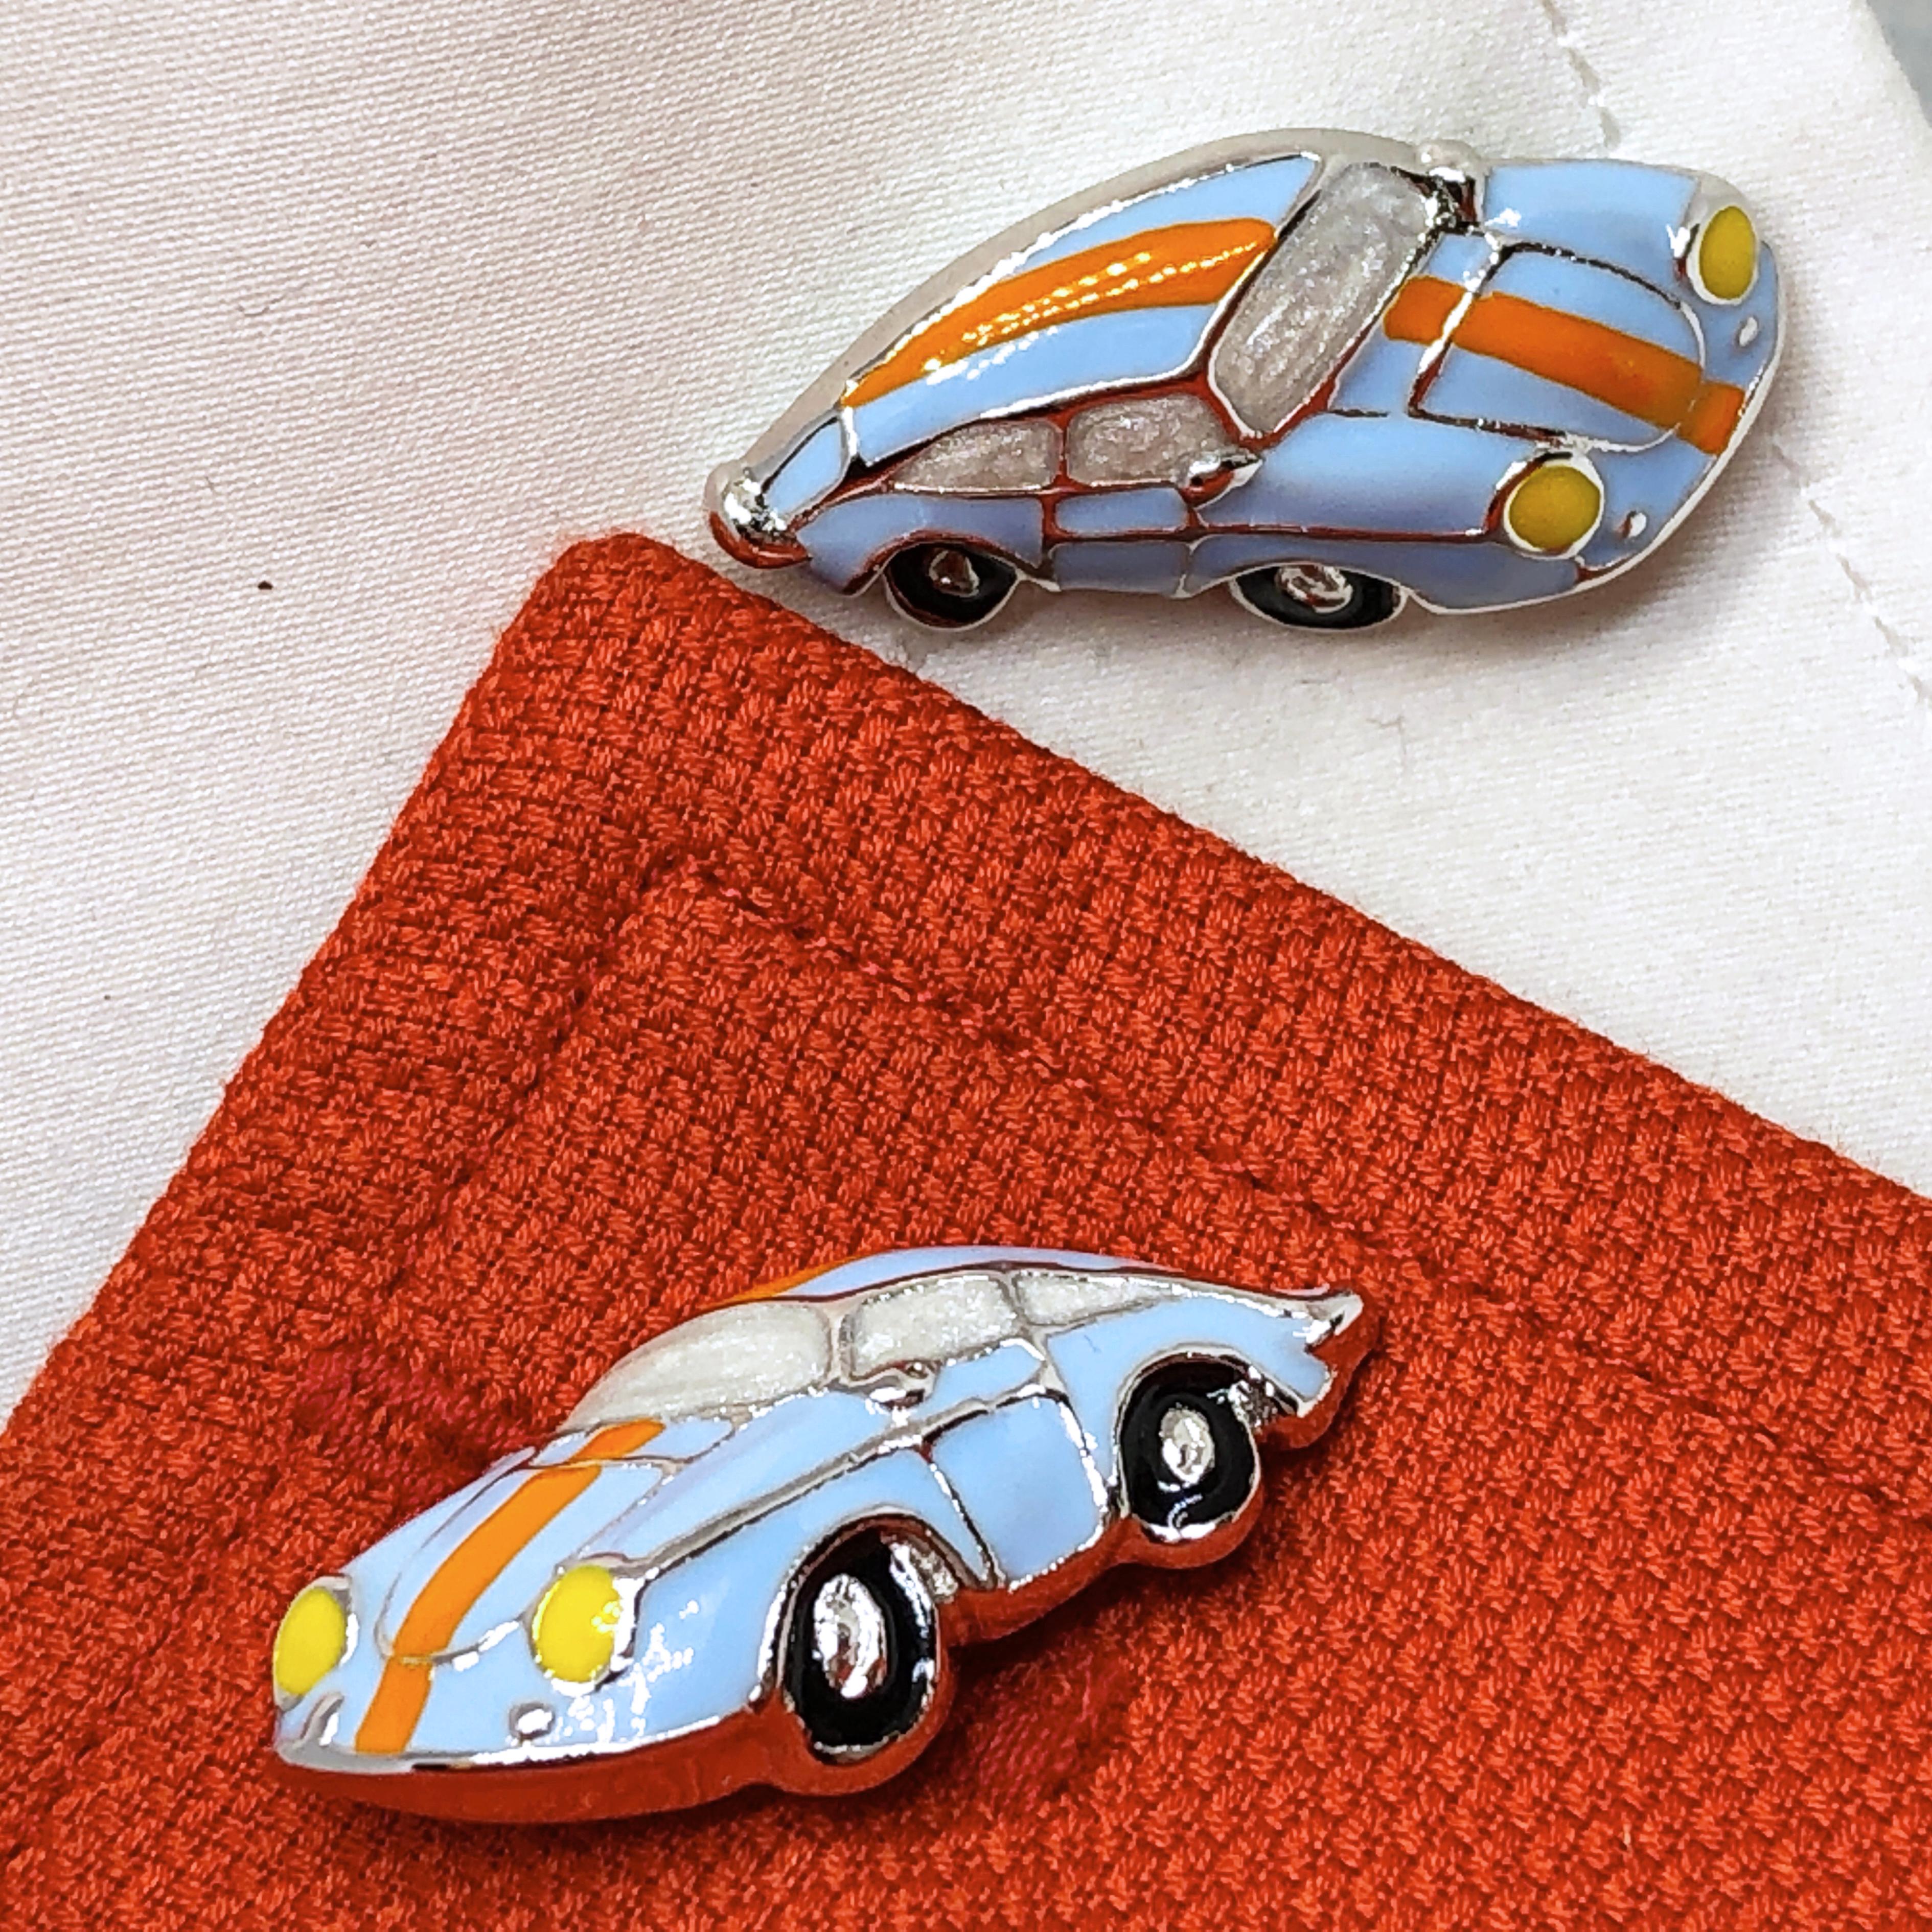 Contemporary Berca Enameled Le Man’s Racing Color 911Porsche Shaped Sterling Silver Cufflinks